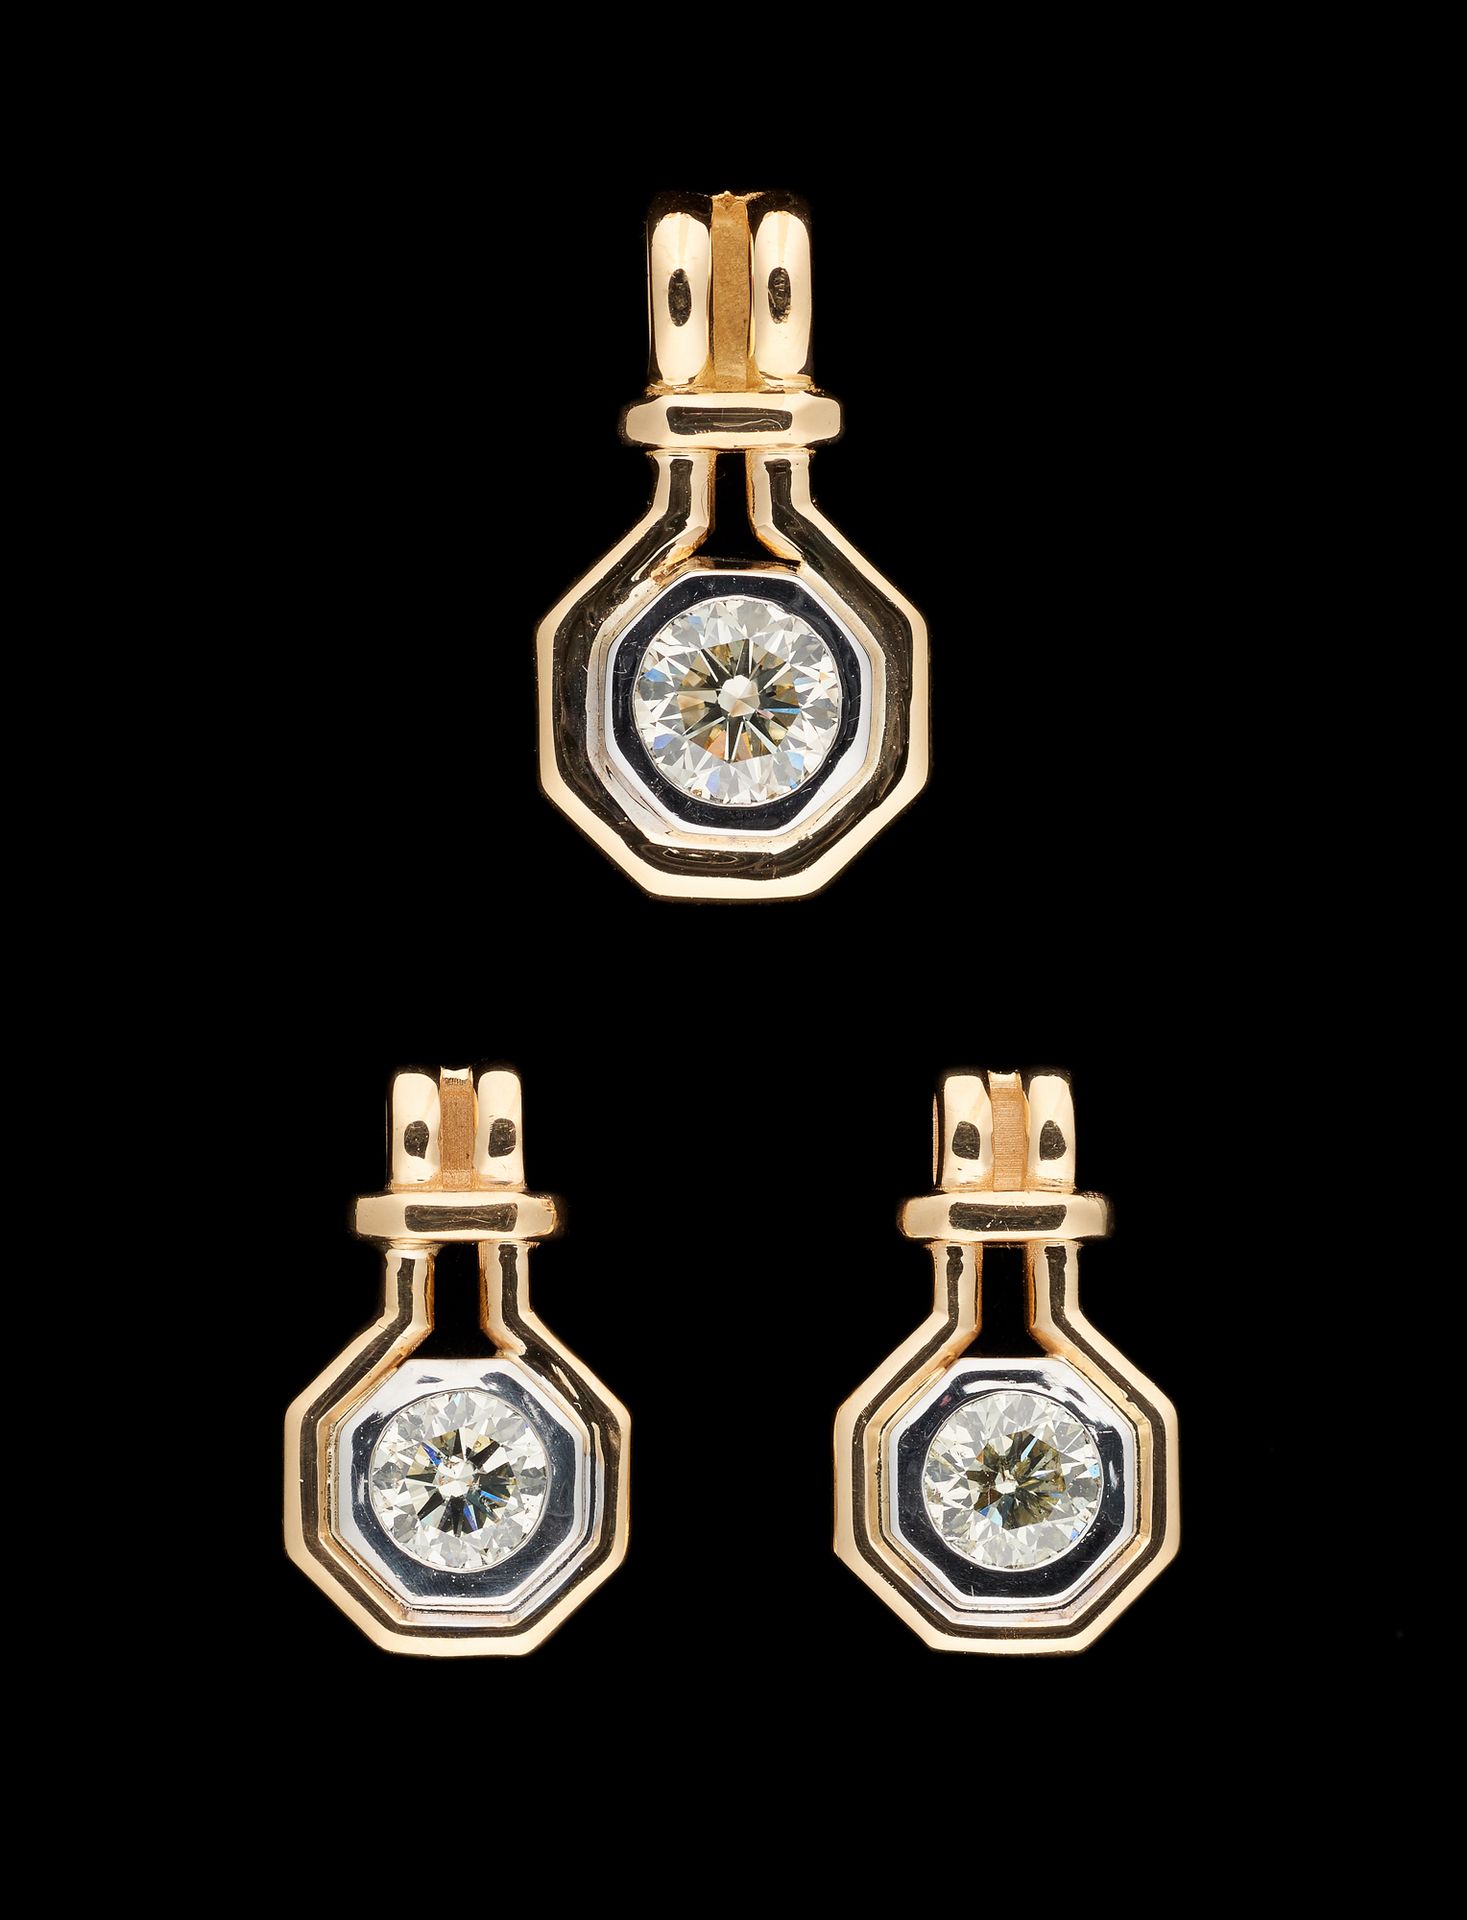 Joaillerie. Jewelry: Lot consisting of a pair of earrings and a pendant in yello&hellip;